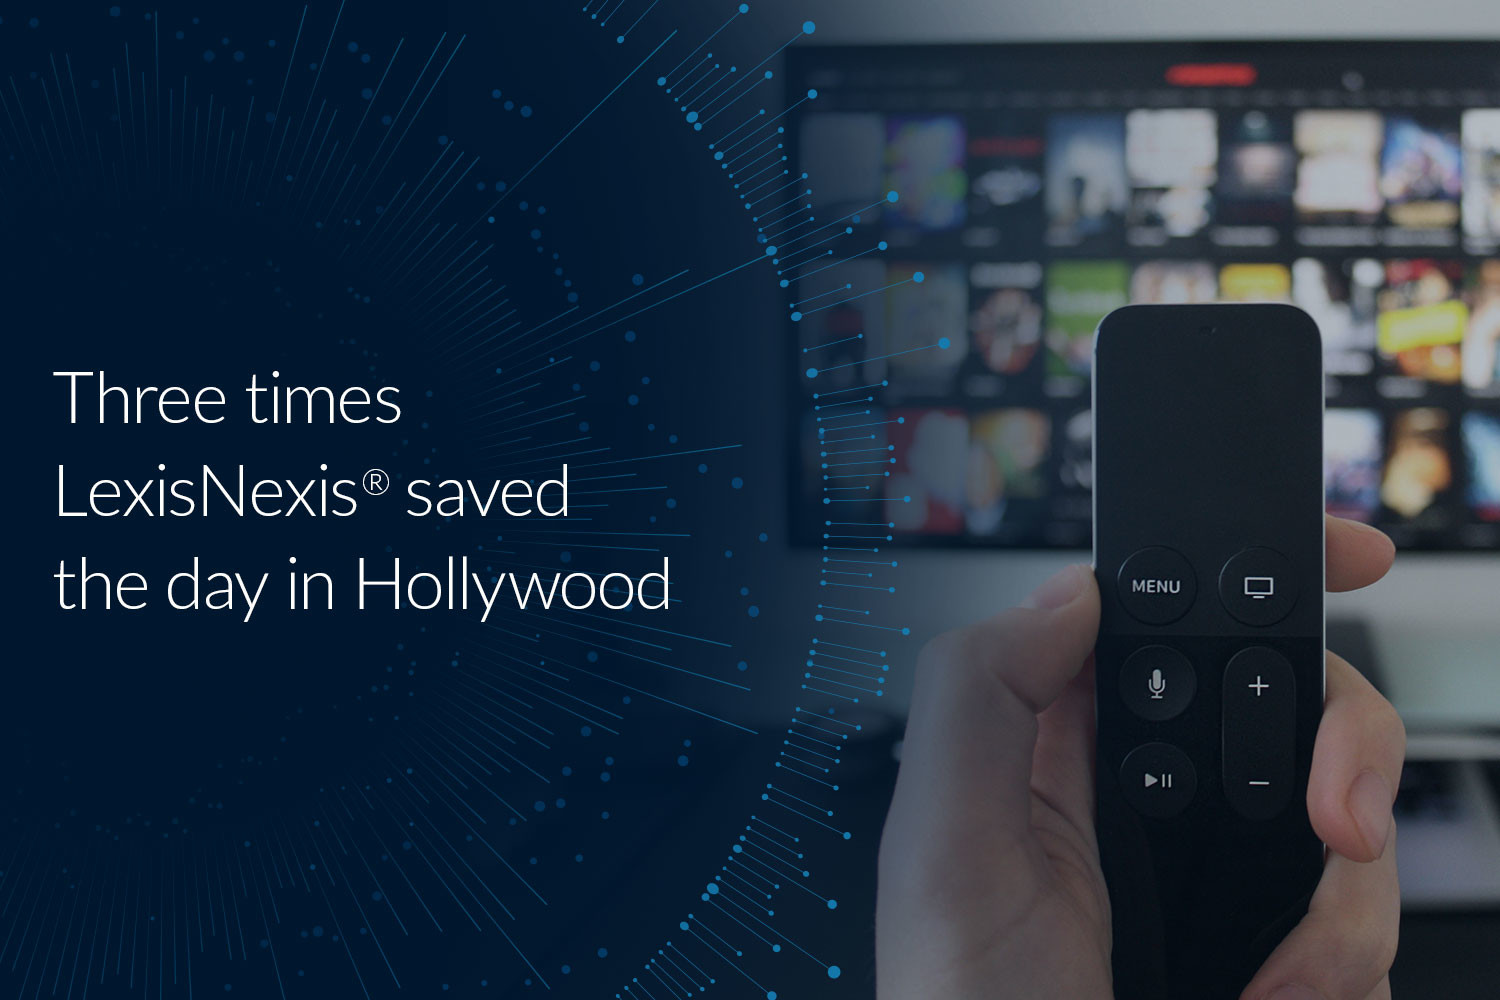 Three times LexisNexis saved the day in Hollywood